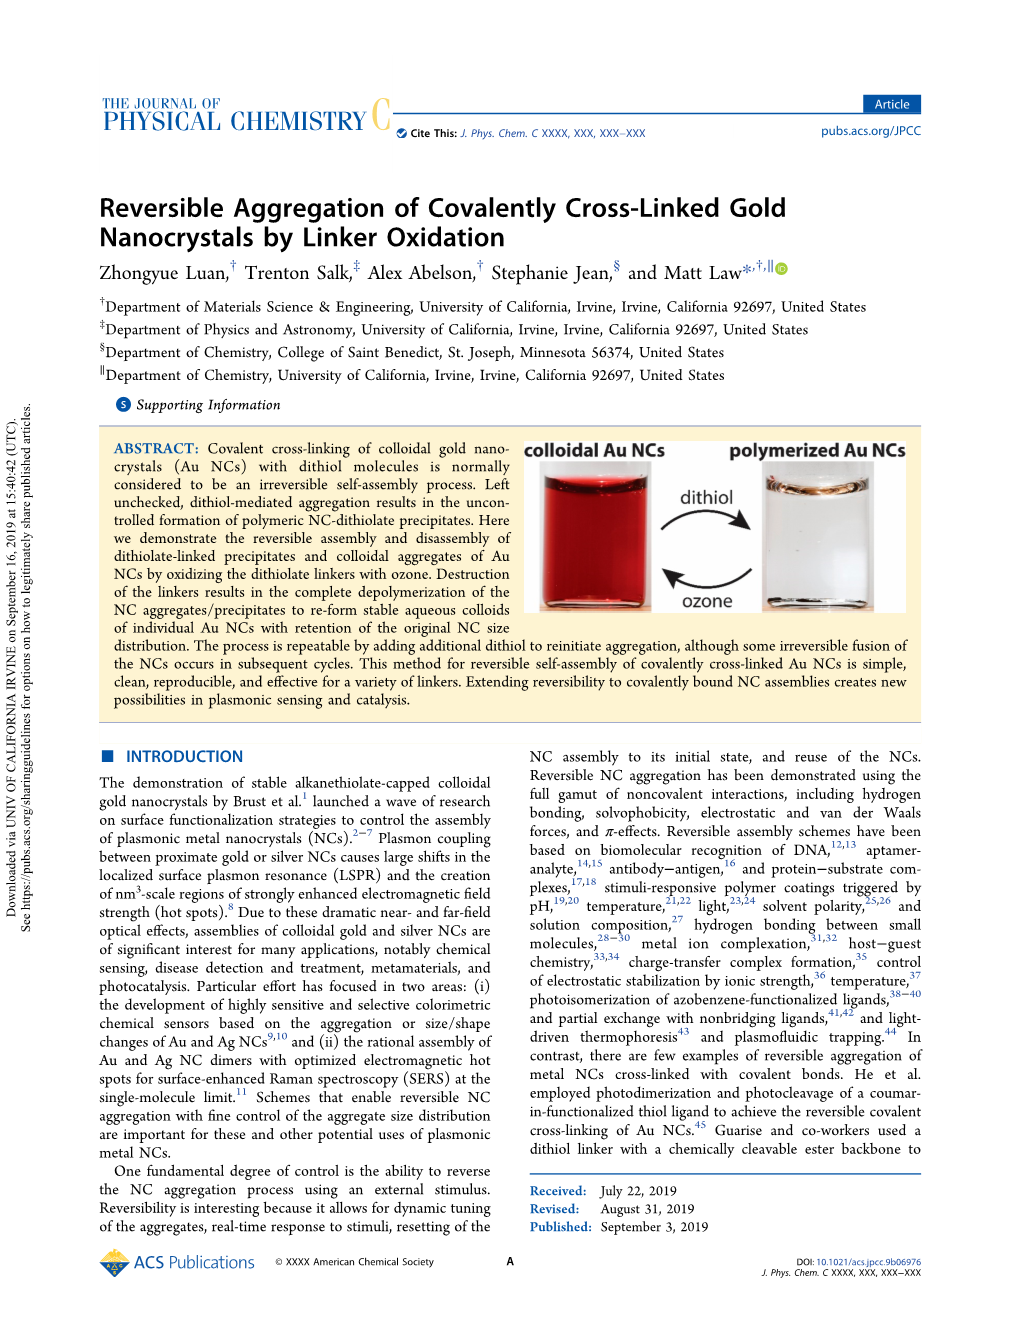 Reversible Aggregation of Covalently Cross-Linked Gold Nanocrystals By